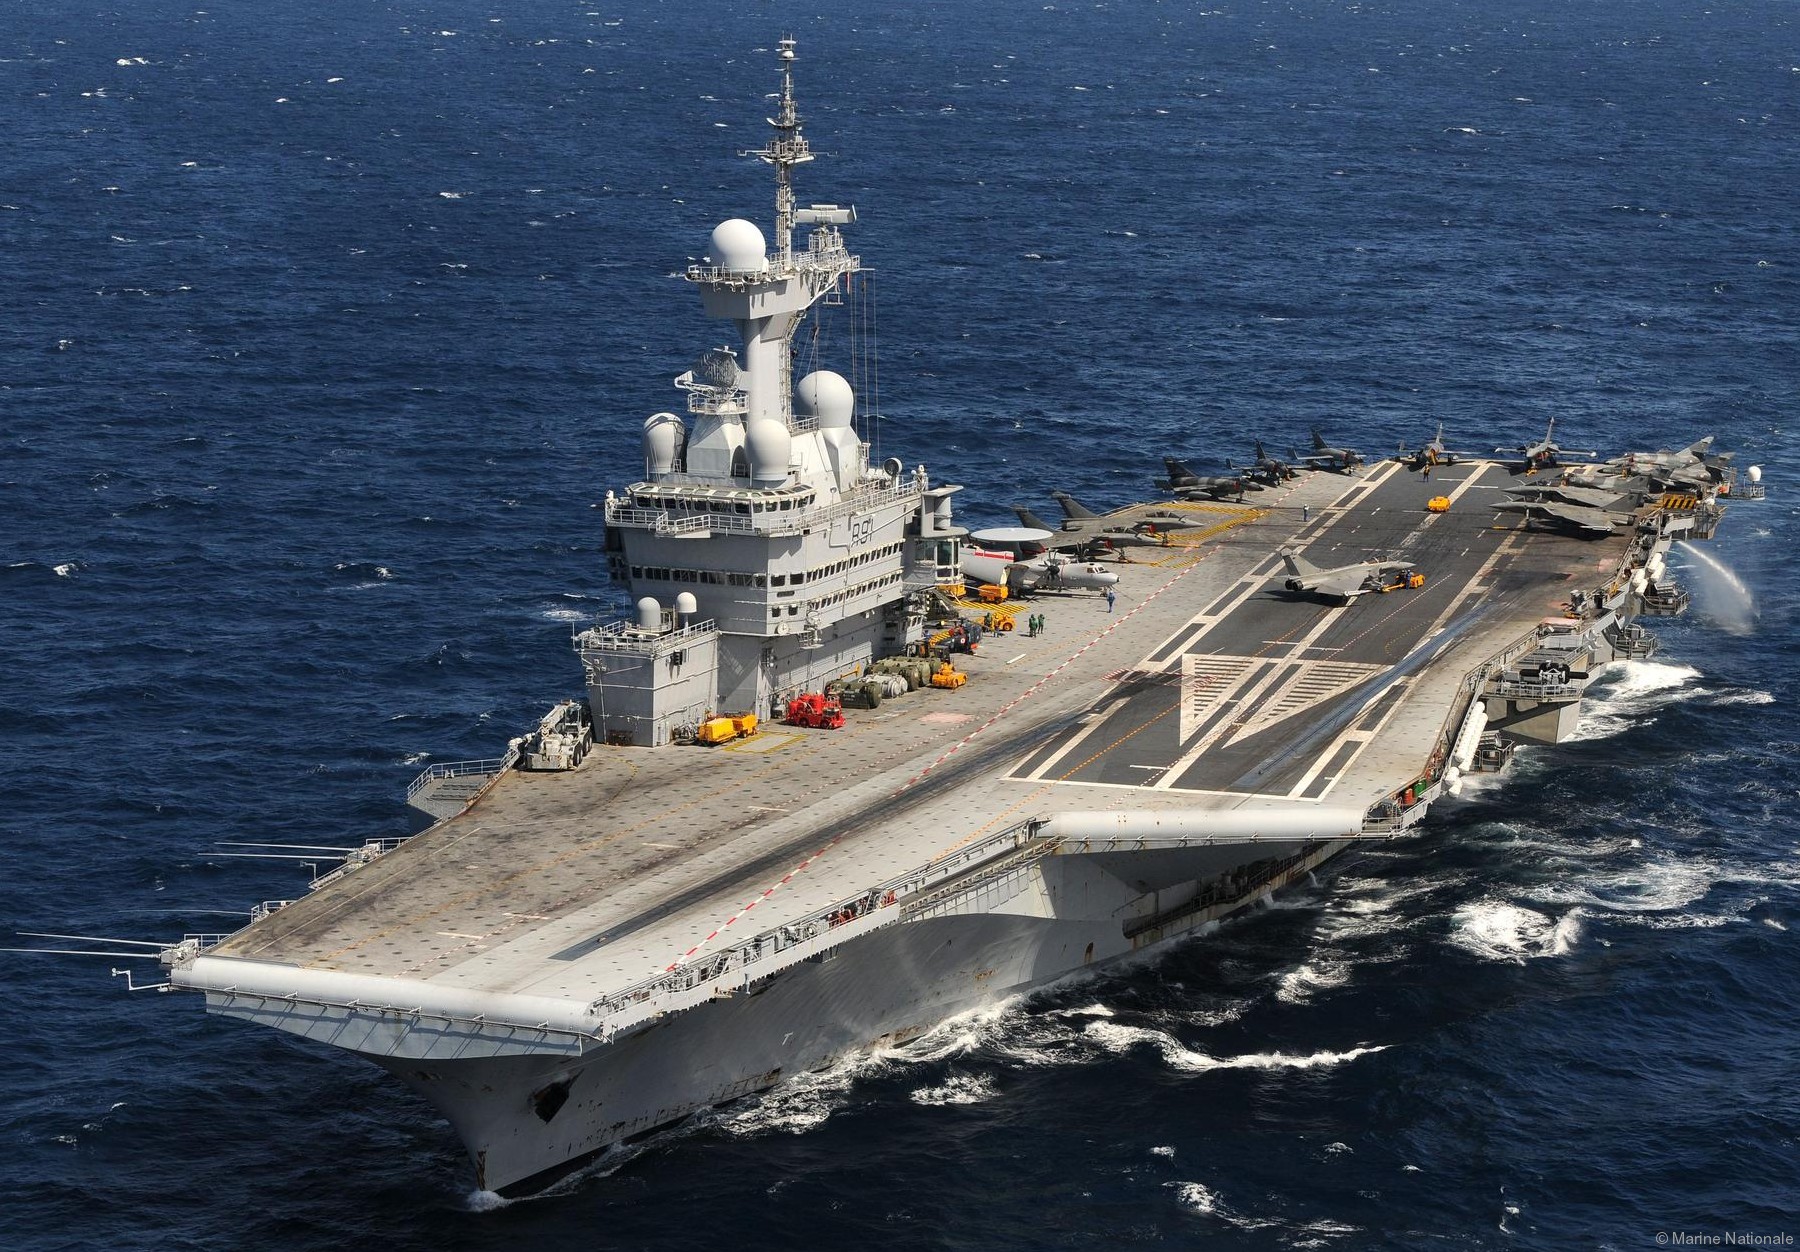 r-91 fs charles de gaulle aircraft carrier french navy 05